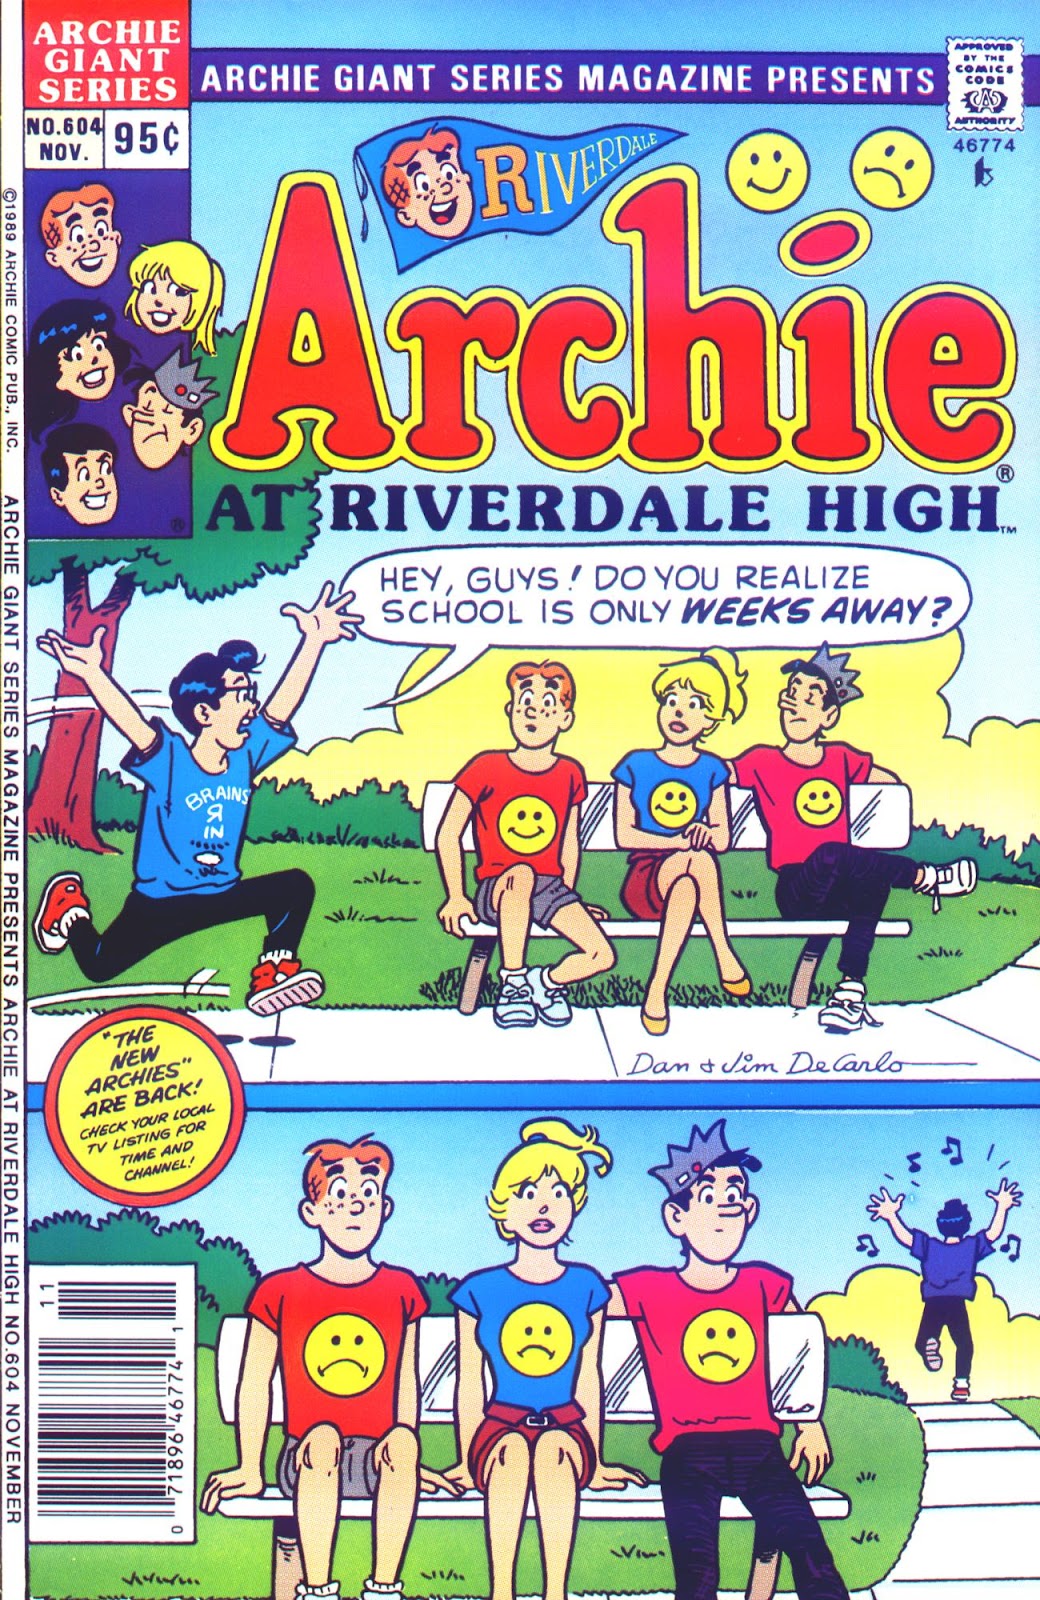 Archie Giant Series Magazine 604 Page 1